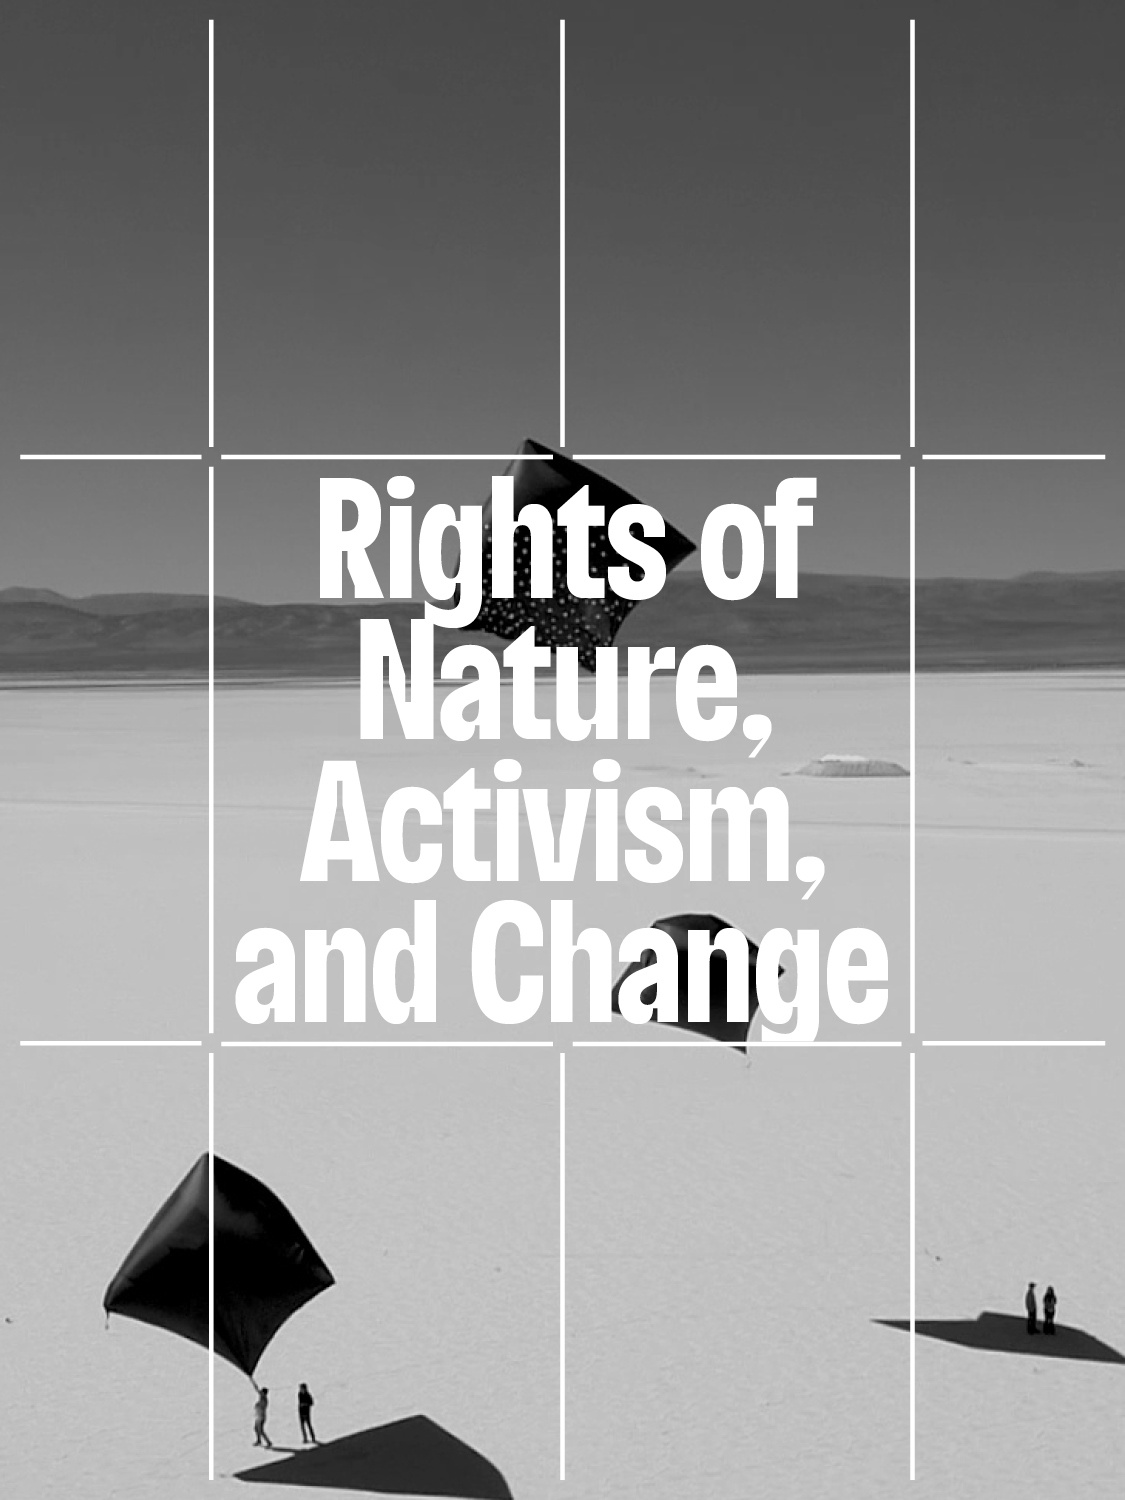 The event title "Rights of Nature, Activism, and Change" overlaid on a photo of small black hot air balloons rising over a salt flat without the use of fossil fuels. 